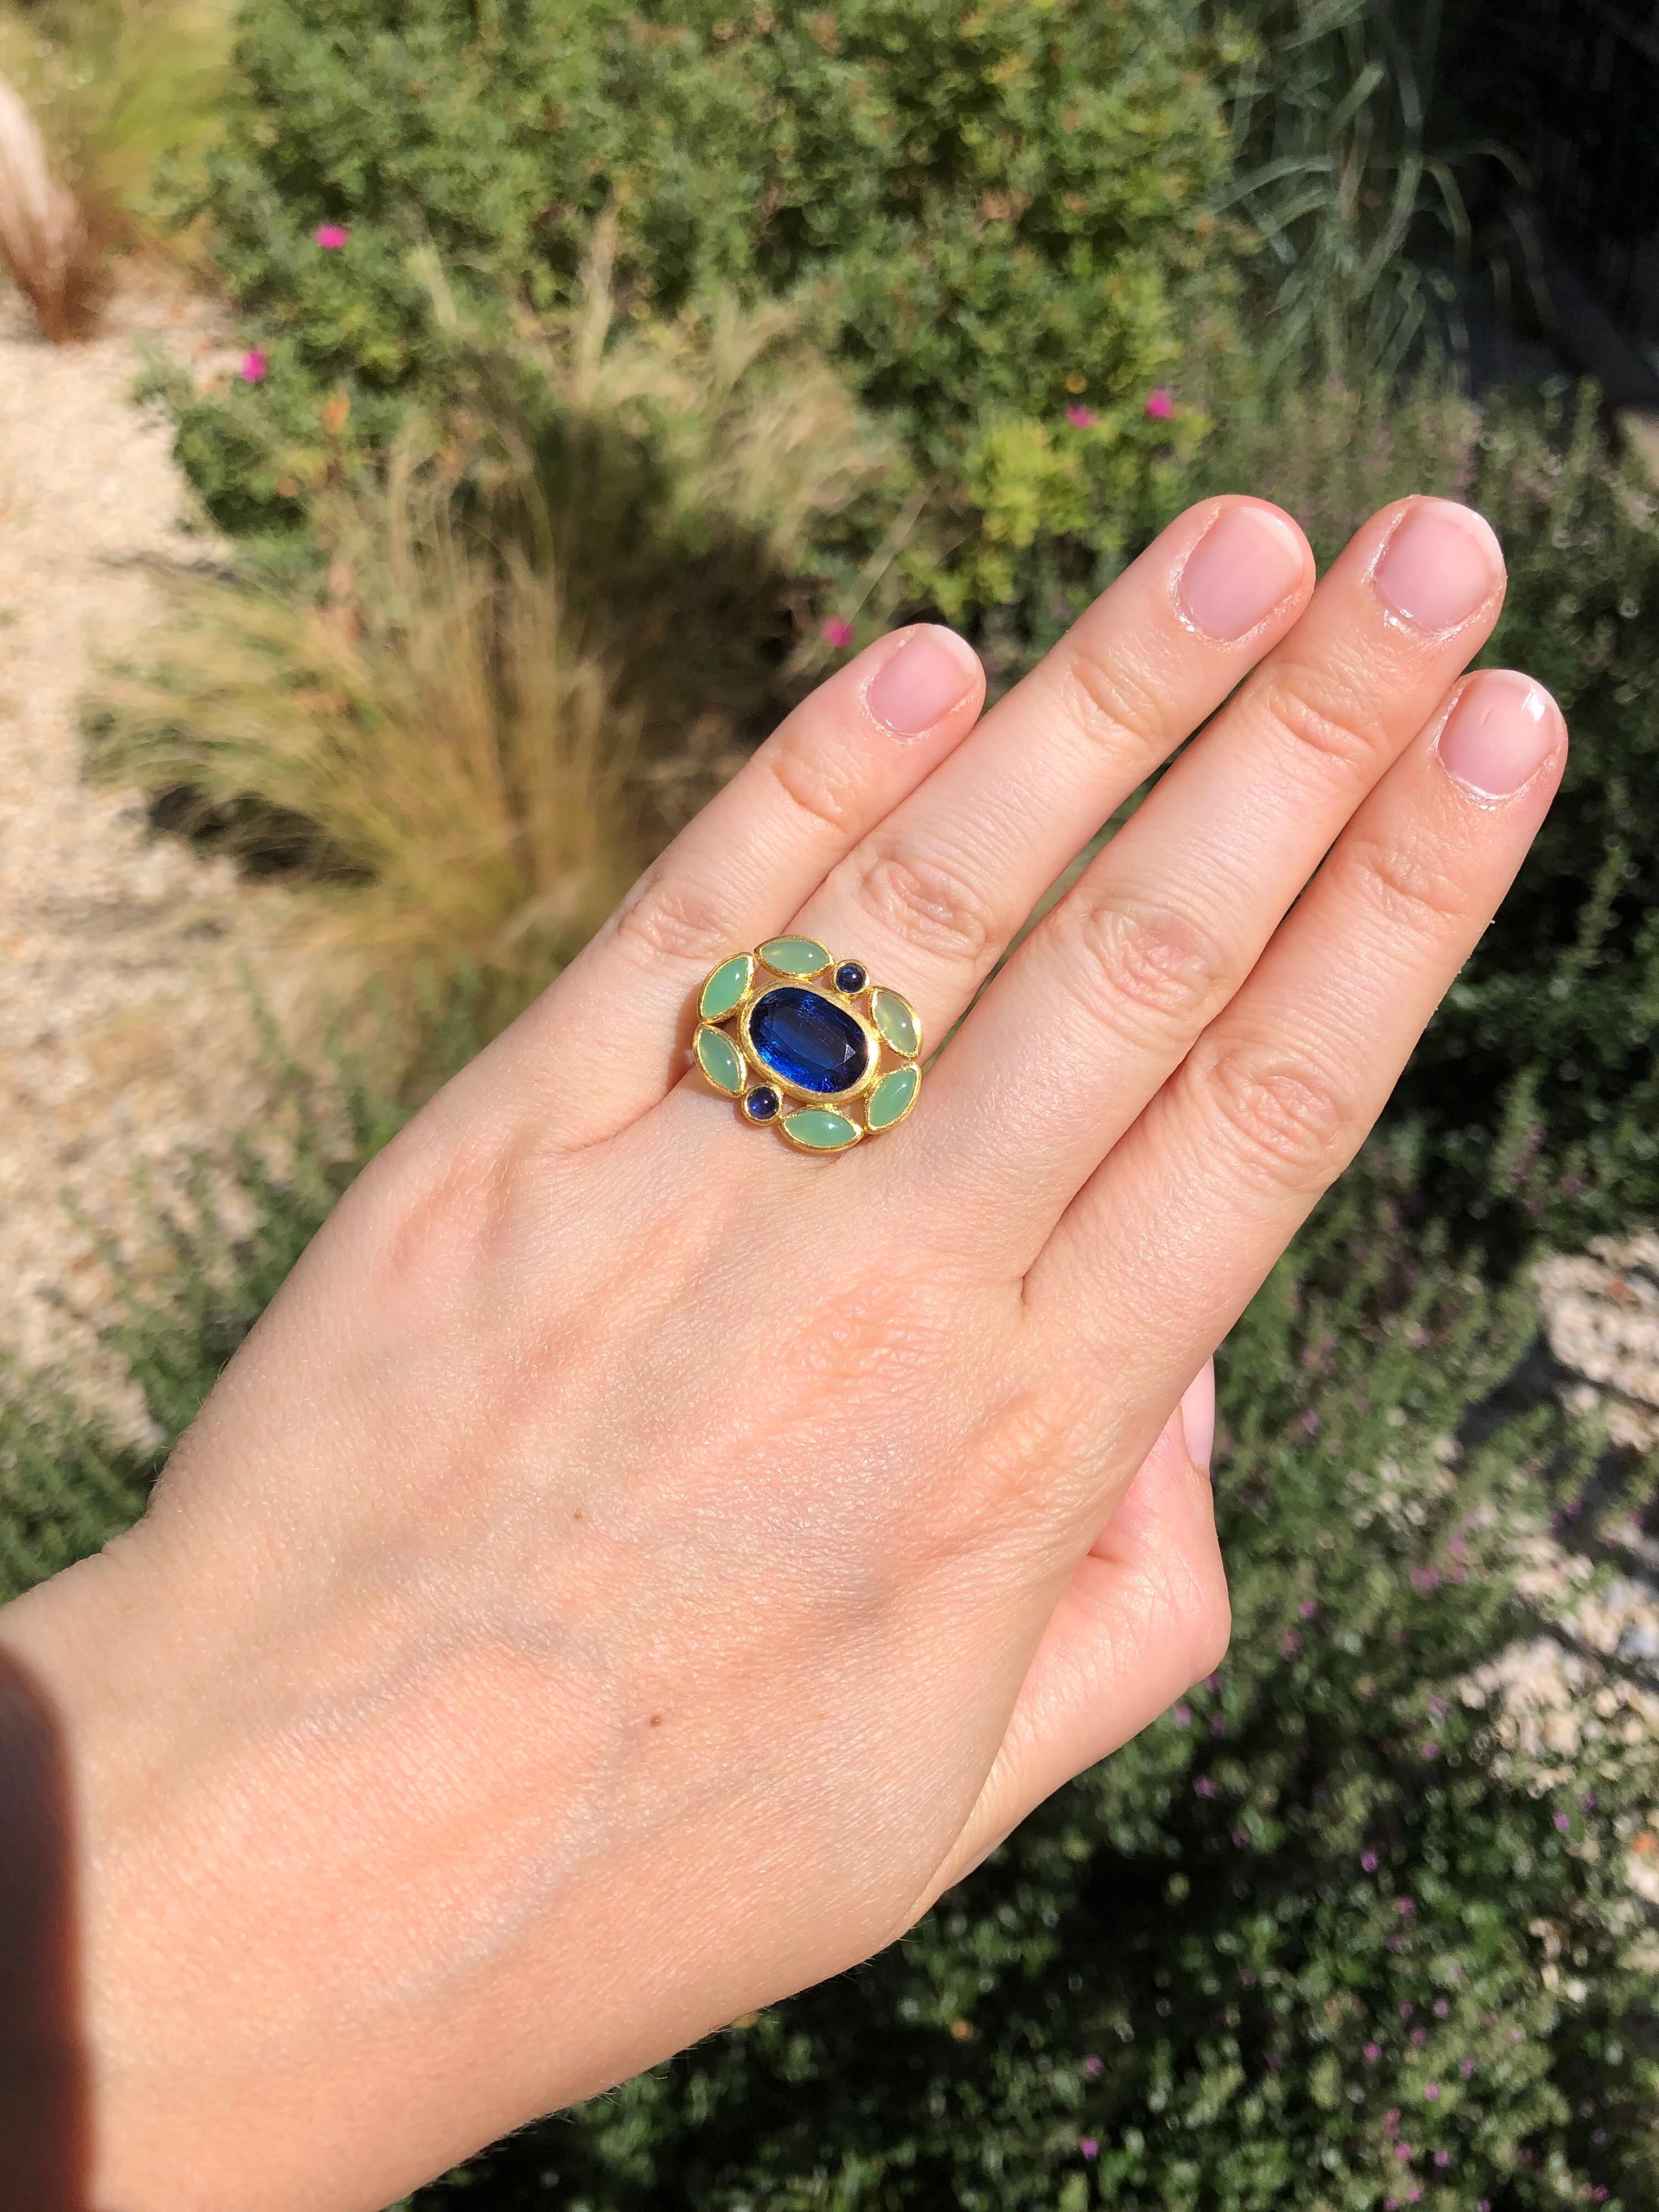 On this one-of-a kind ring by Scrives, a kyanite of 4.63cts is surrounded by 6 navette cabochons of chrysoprase (green natural chalcedony) and 2 blue sapphires cabochons. 
All the stones are set at the same level in 22 kt gold. 
The color of the